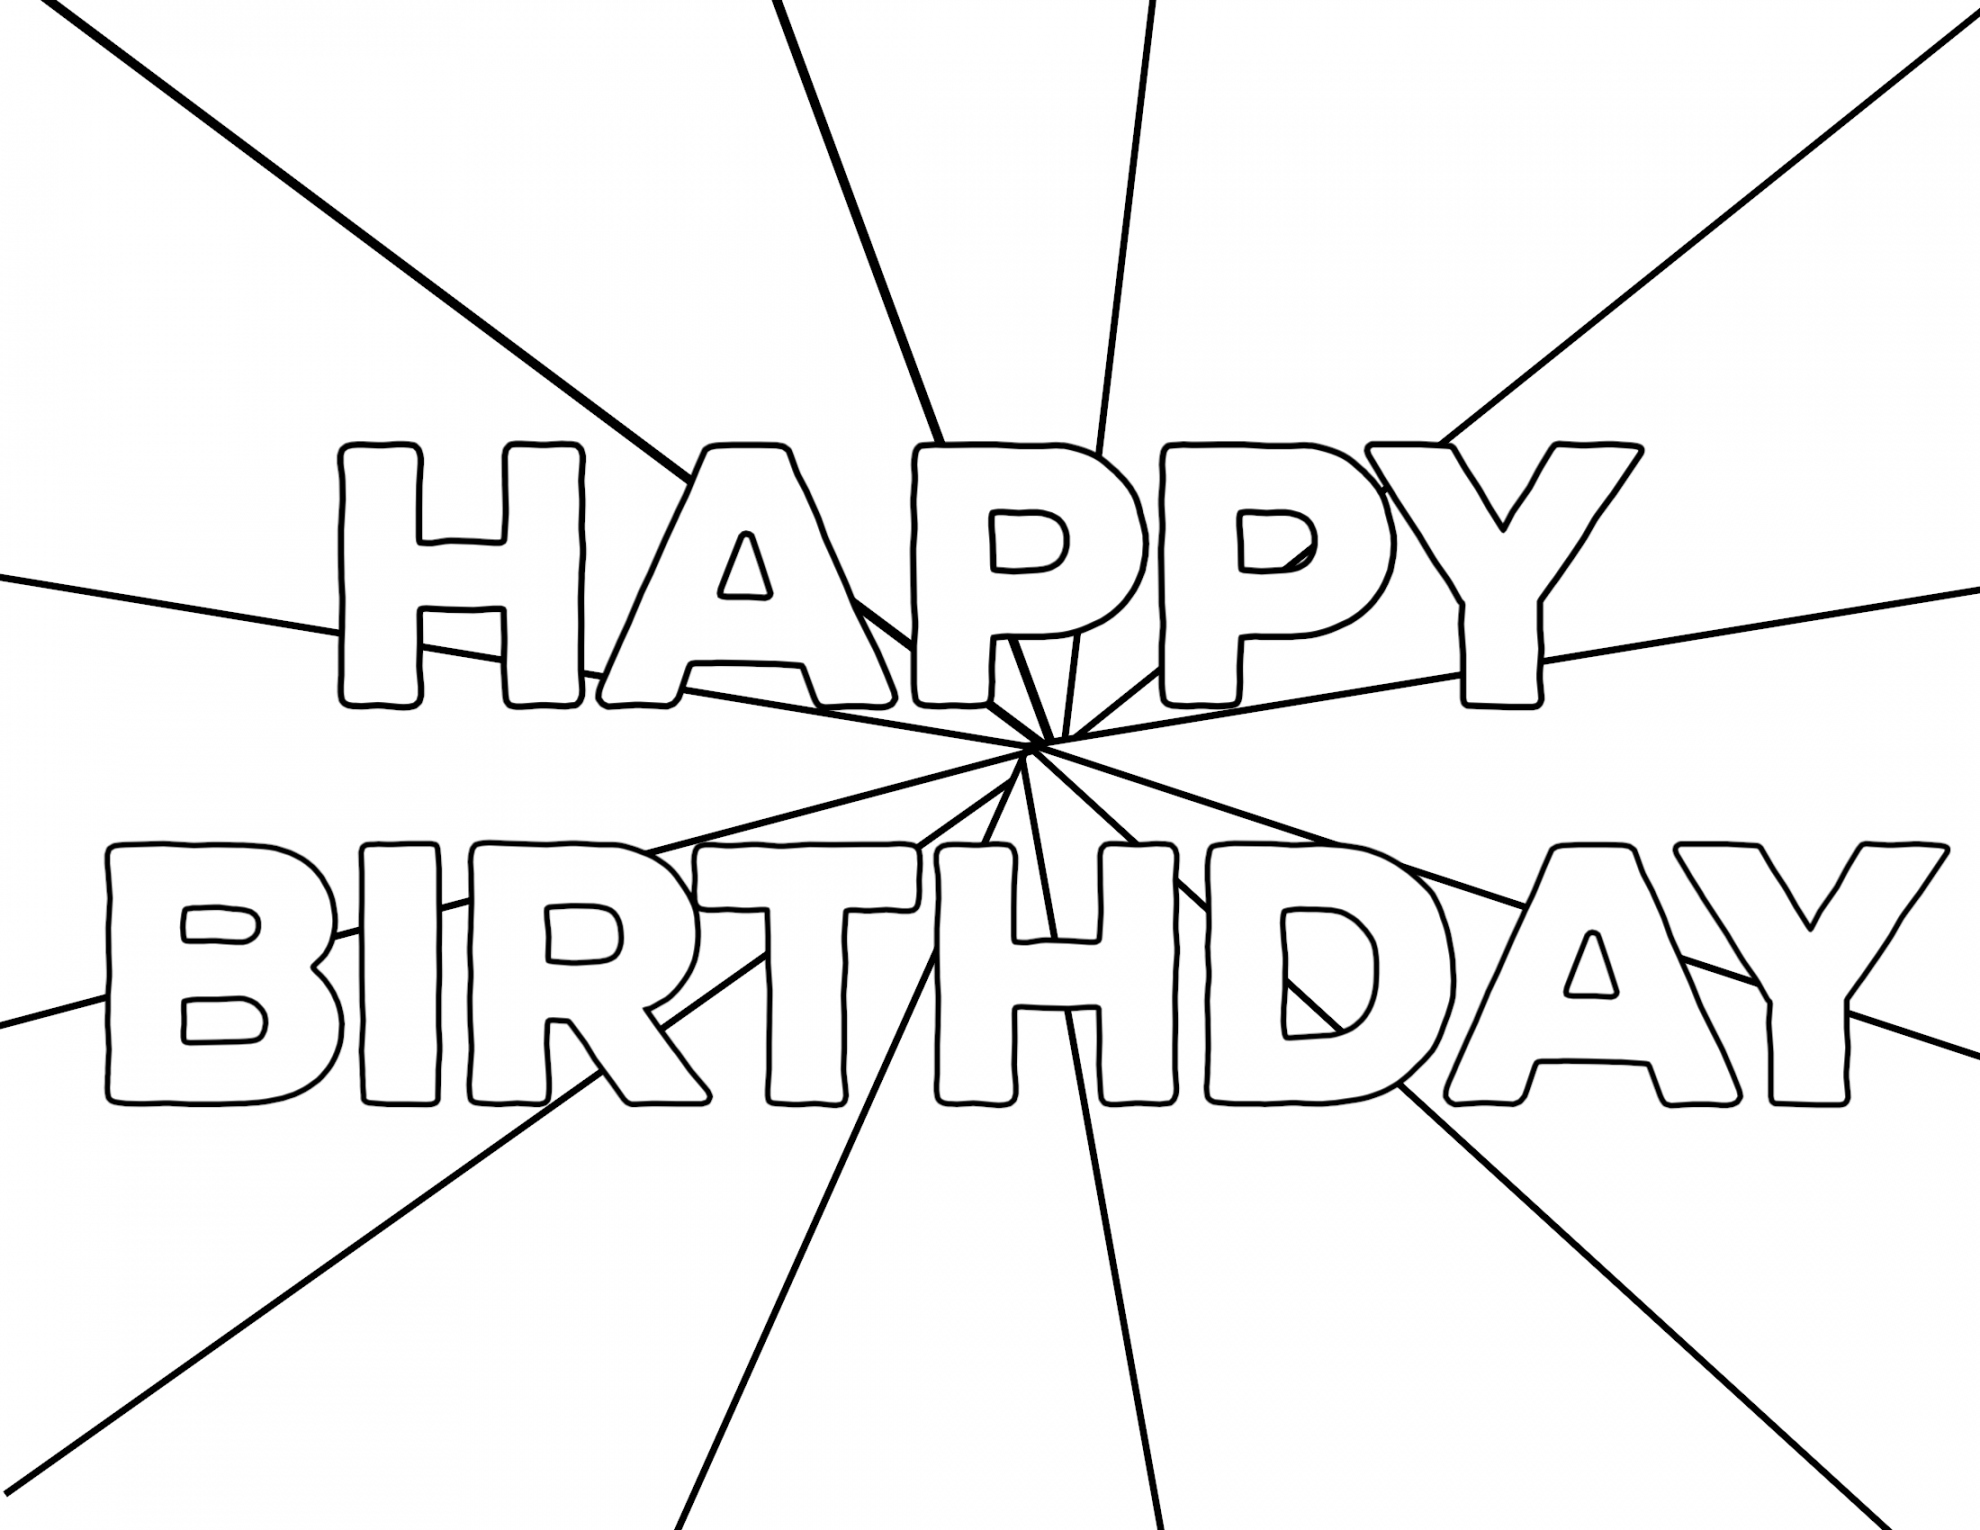 Free Printable Happy Birthday Coloring Page - Printable - Free Printable Happy Birthday Coloring Pages - Paper Trail Design